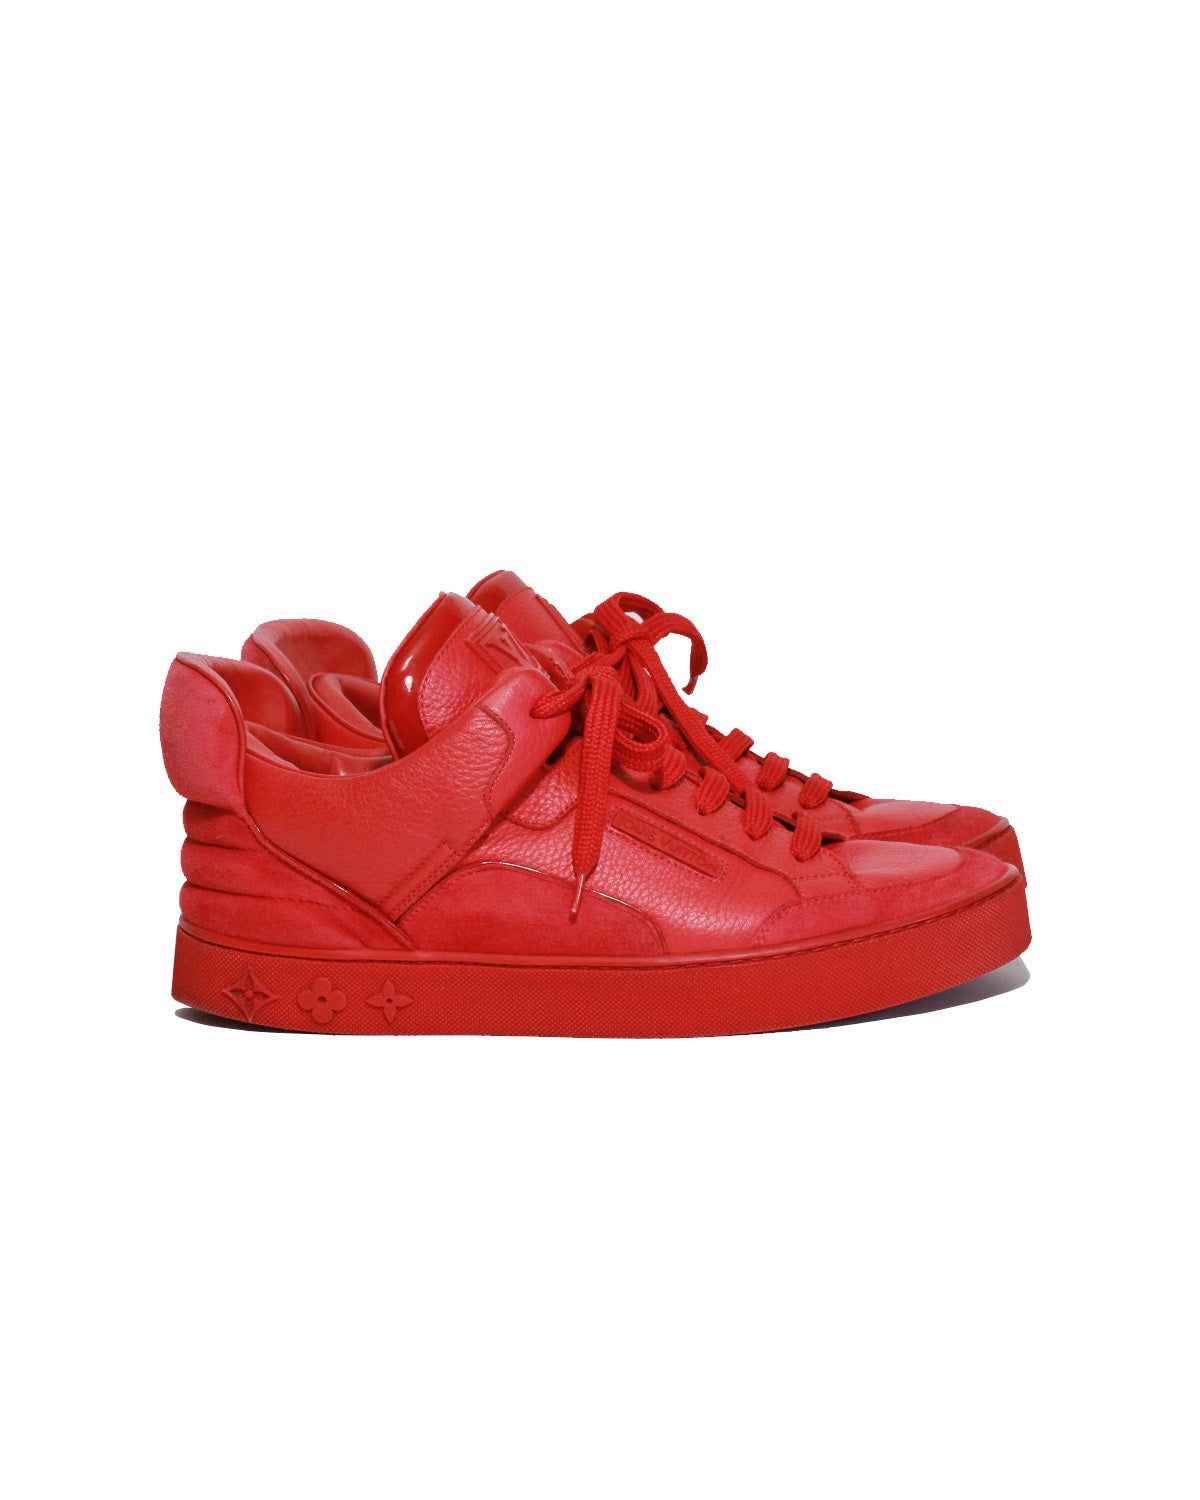 Louis Vuitton Kanye West Red Dons Size LV 7